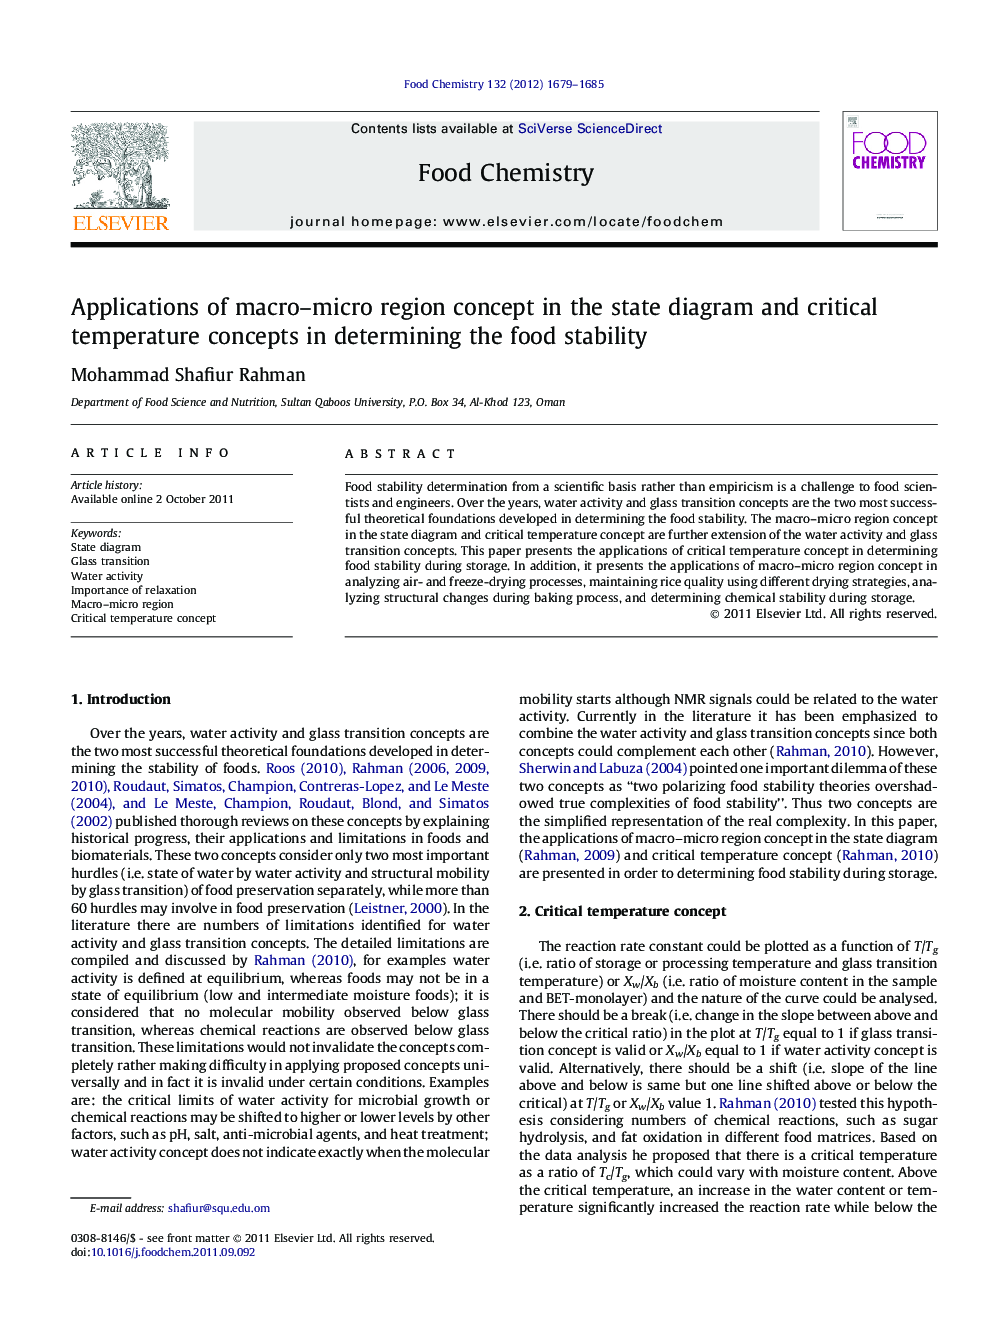 Applications of macro-micro region concept in the state diagram and critical temperature concepts in determining the food stability